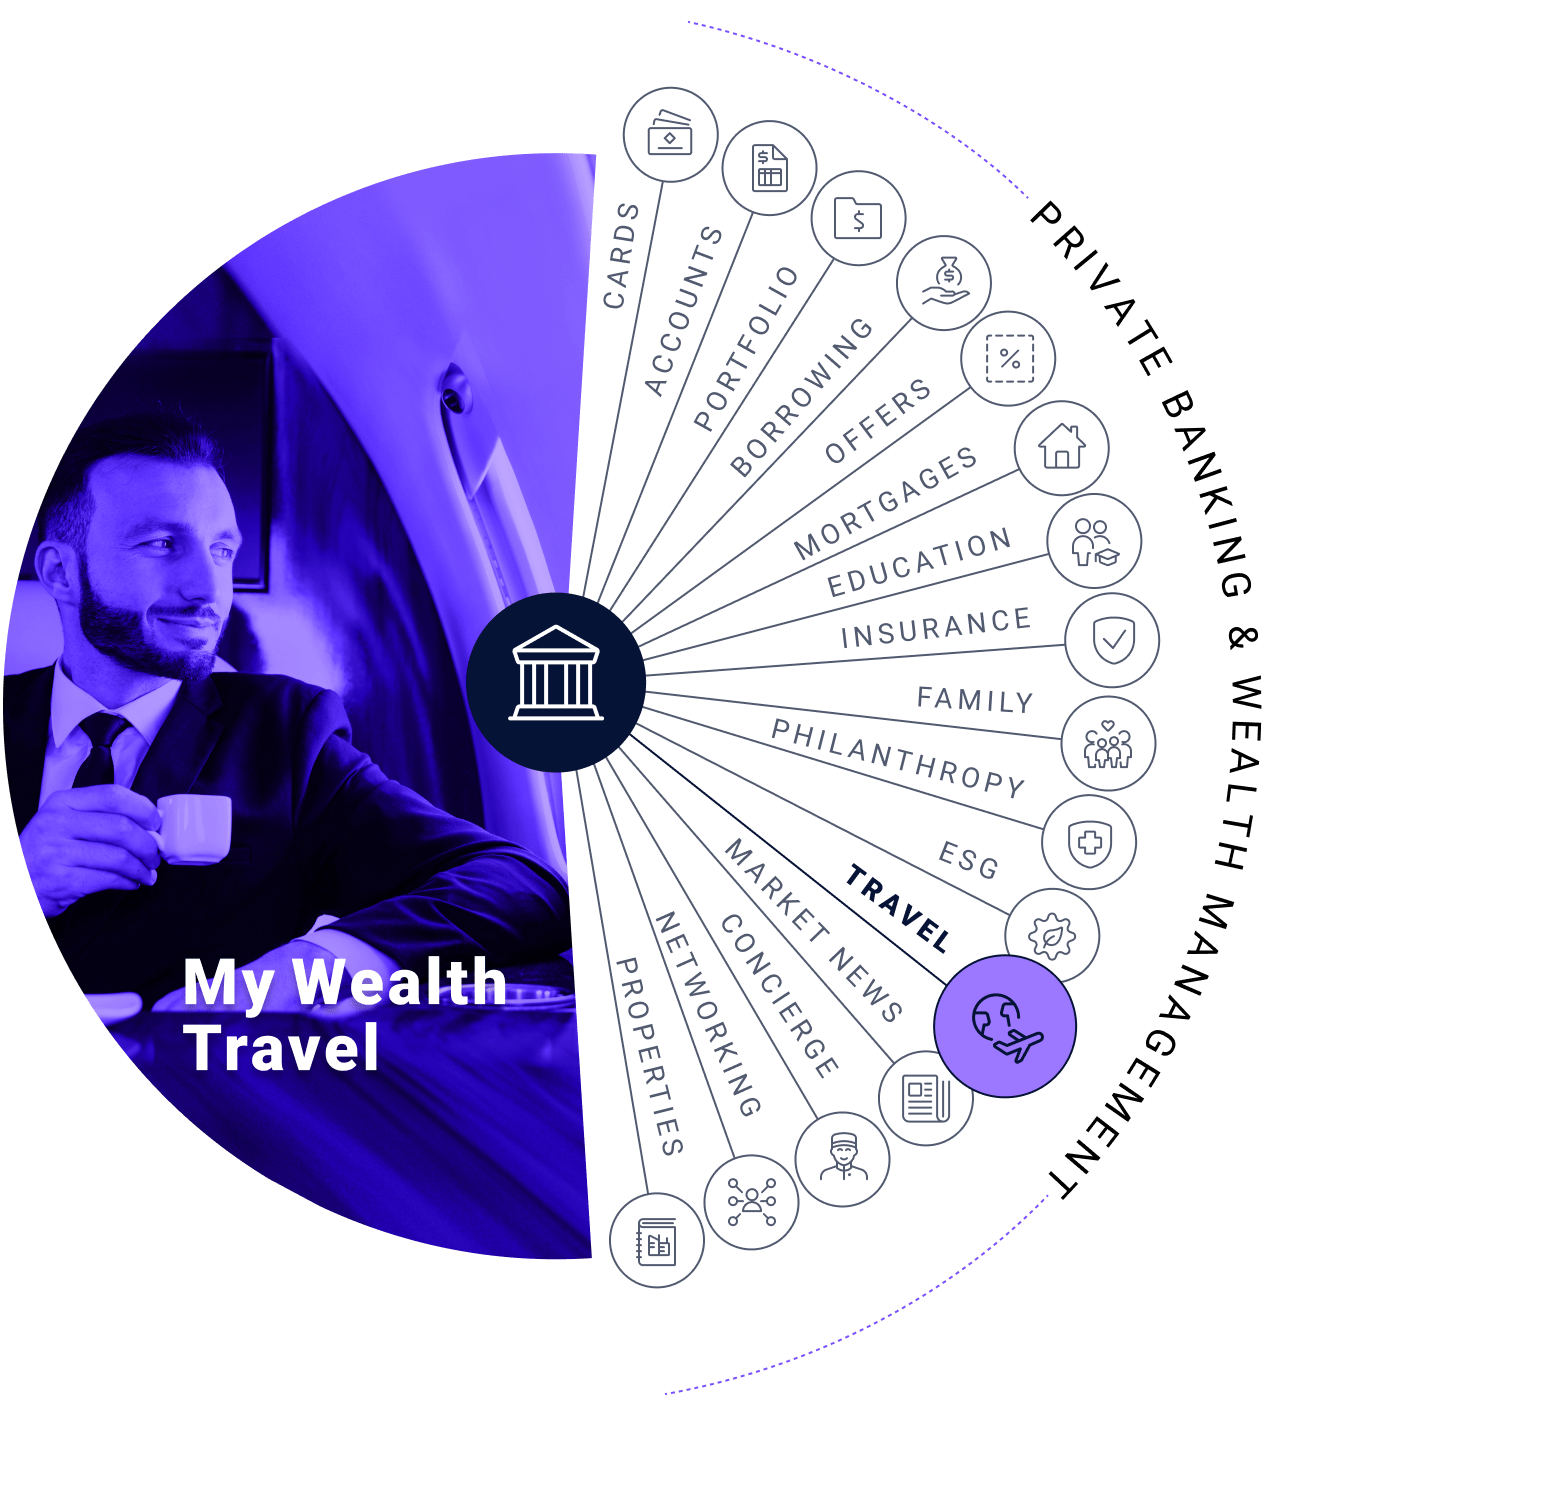 My Wealth Travel: cards, accounts, portfolio, borrowing, offers, mortgages, education, insurance, family, philanthropy, esg, travel, market news, concierge, networking, and properties